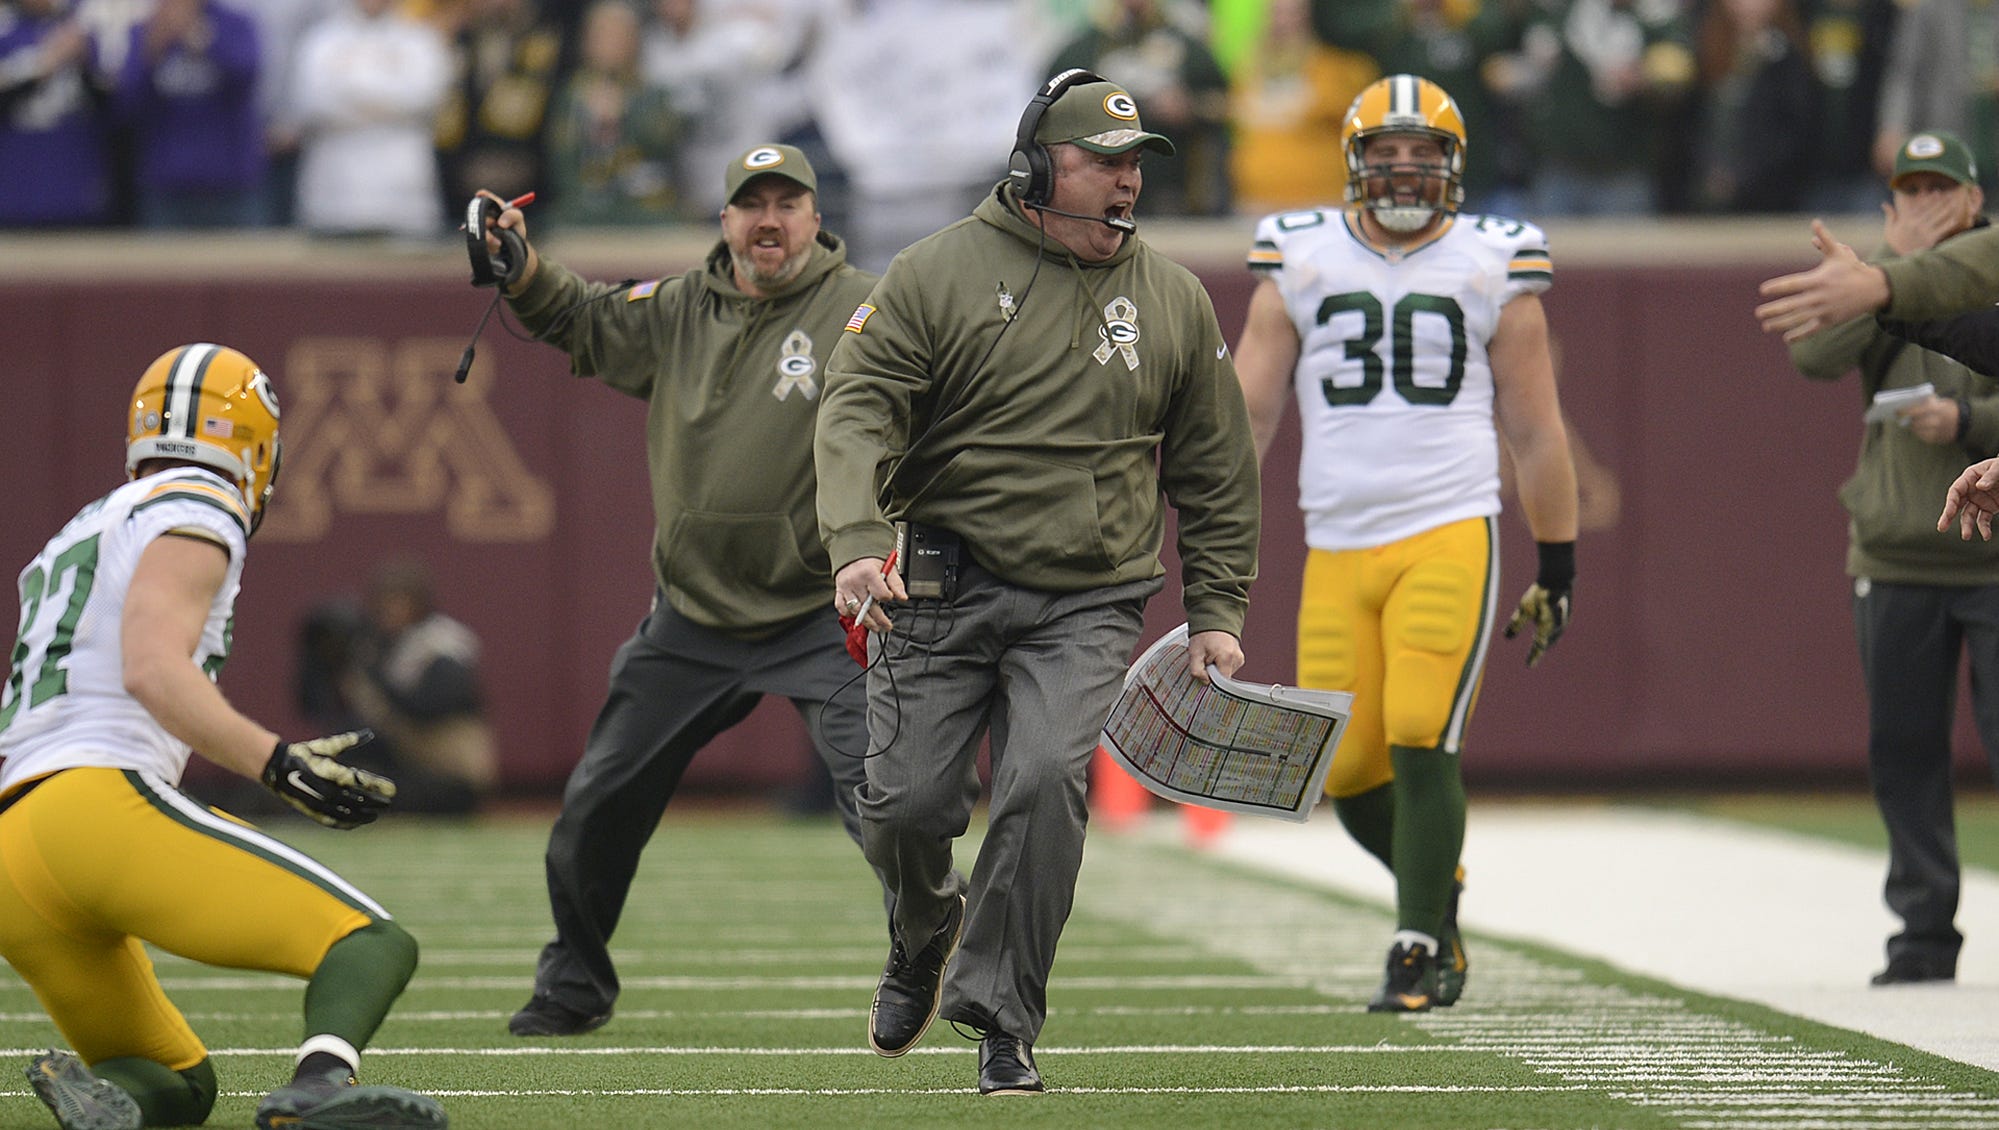 Green Bay Packers coach Mike McCarthy screams with anger after a play against the Minnesota Vikings on Nov. 23, 2014, at TCF Bank Stadium in Minneapolis.